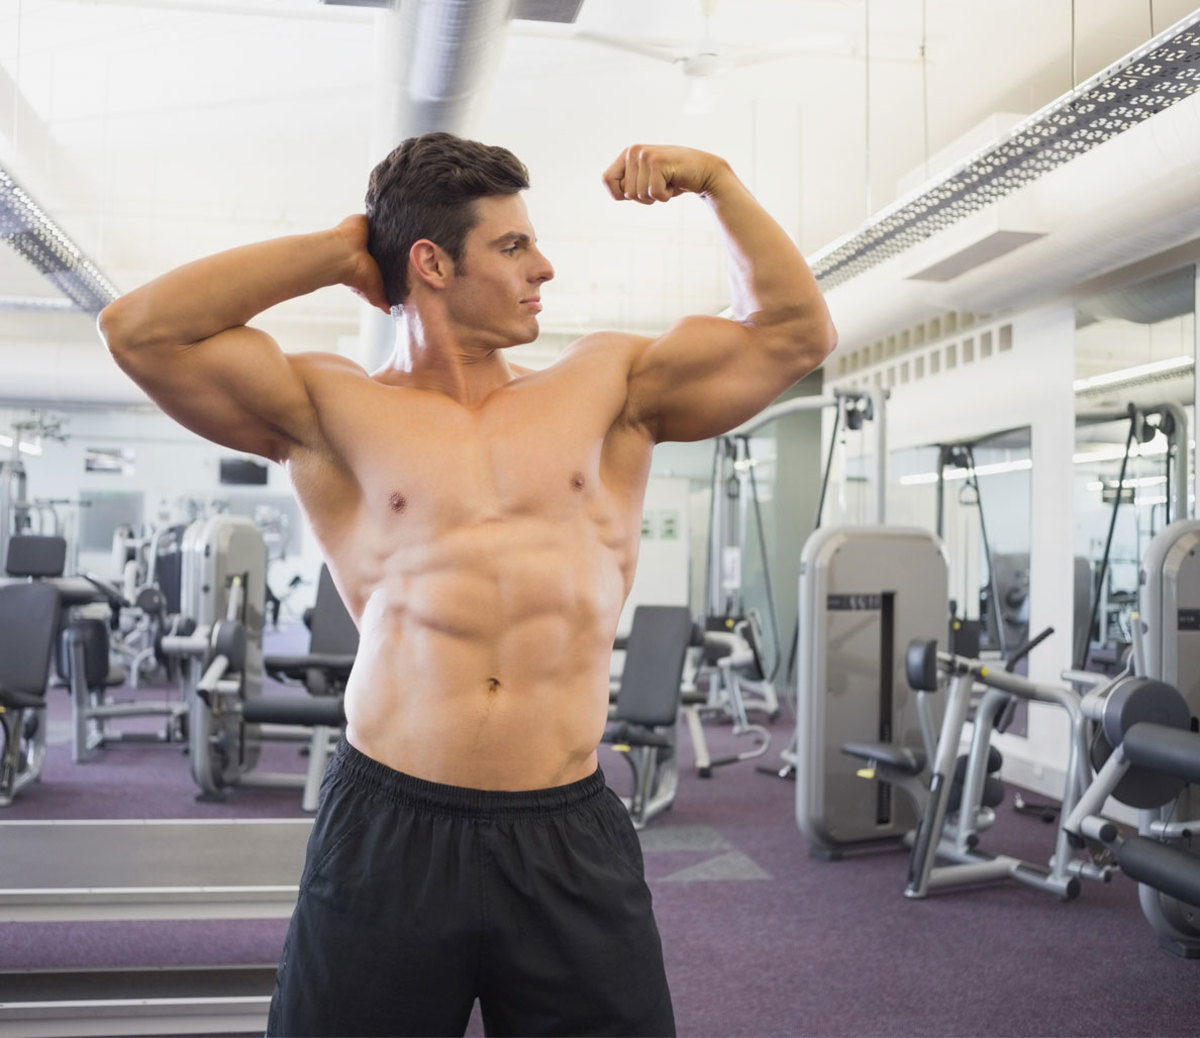 16 Things People Do at the Gym That Drive You Crazy - Men's Journal